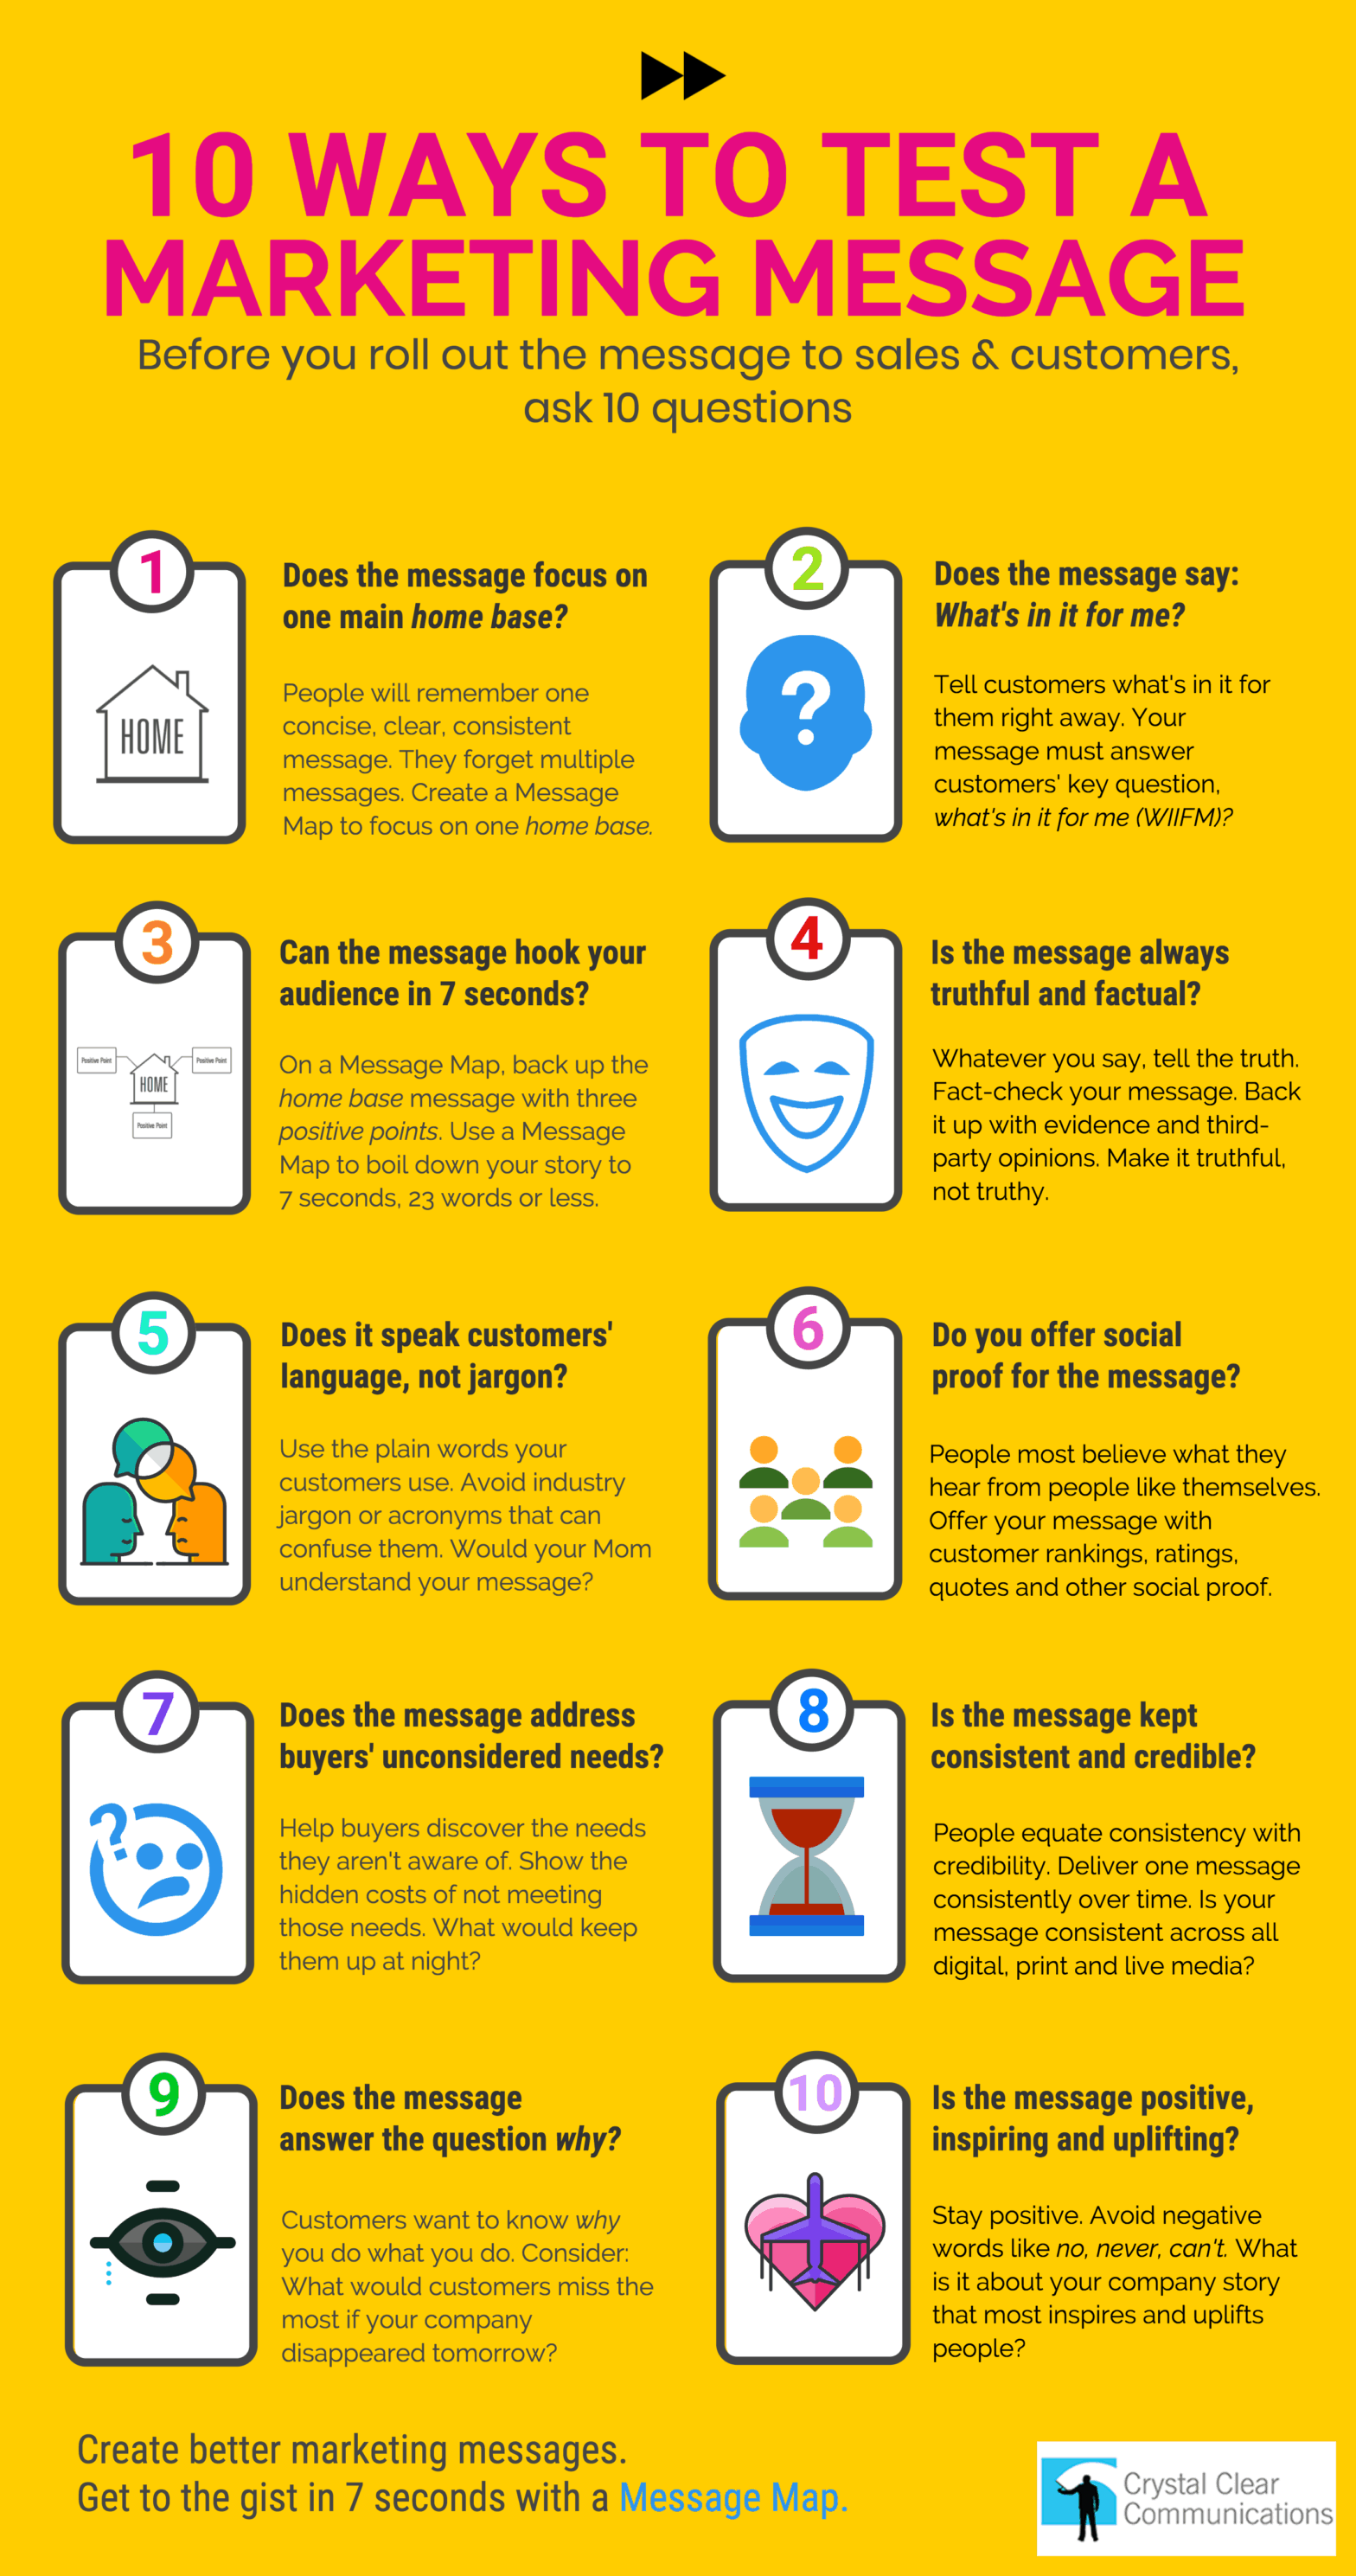 10 Ways to Test a Marketing Message - Infographic